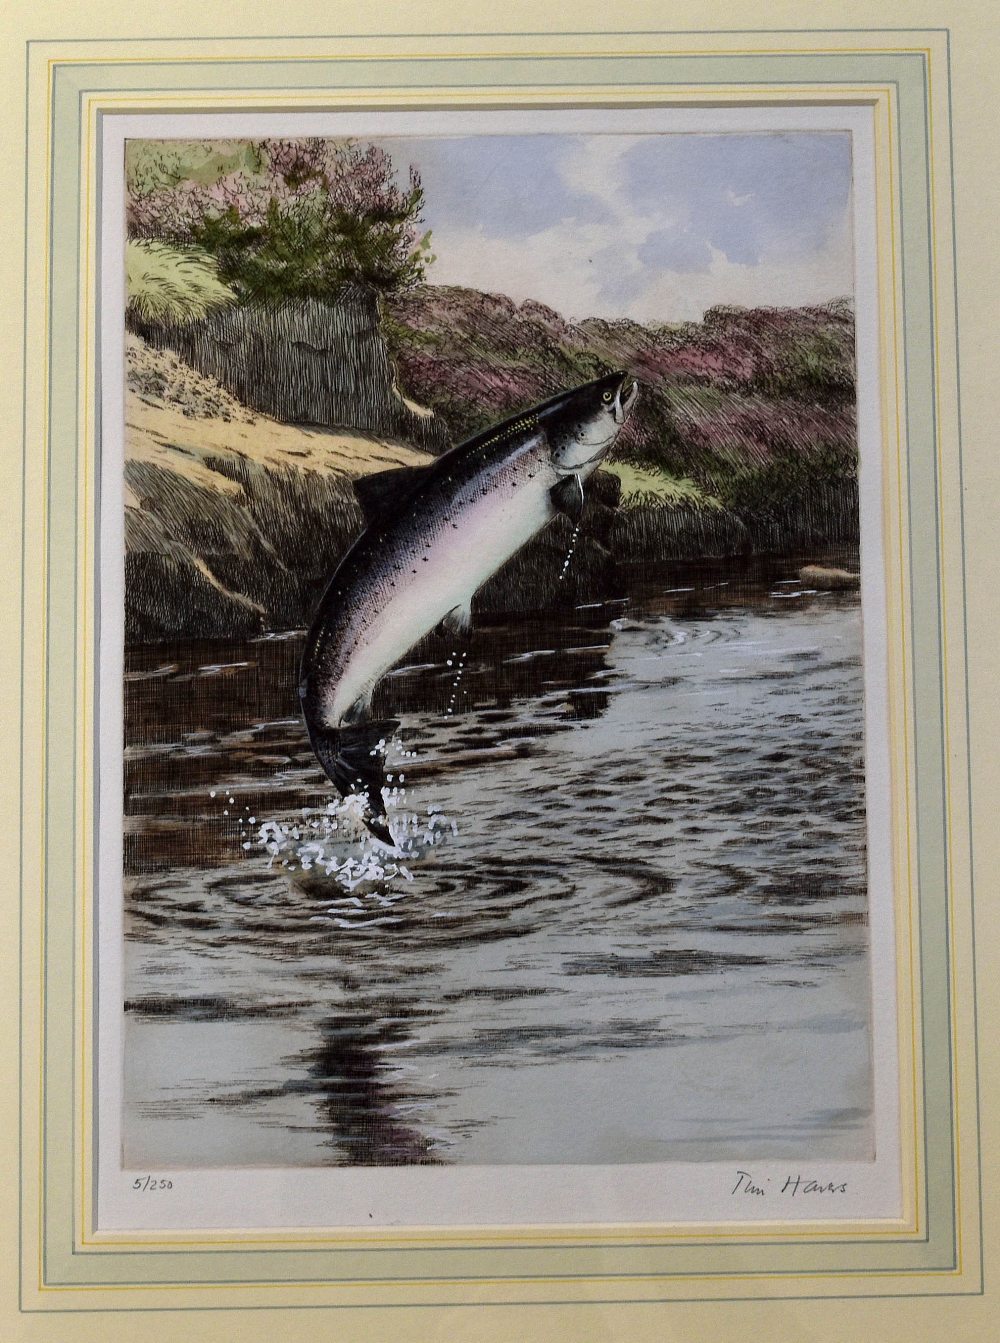 Pair Signed Ltd Ed Fishing Prints: after Tim Havers depicting a leaping Sea Trout and a leaping - Image 2 of 2